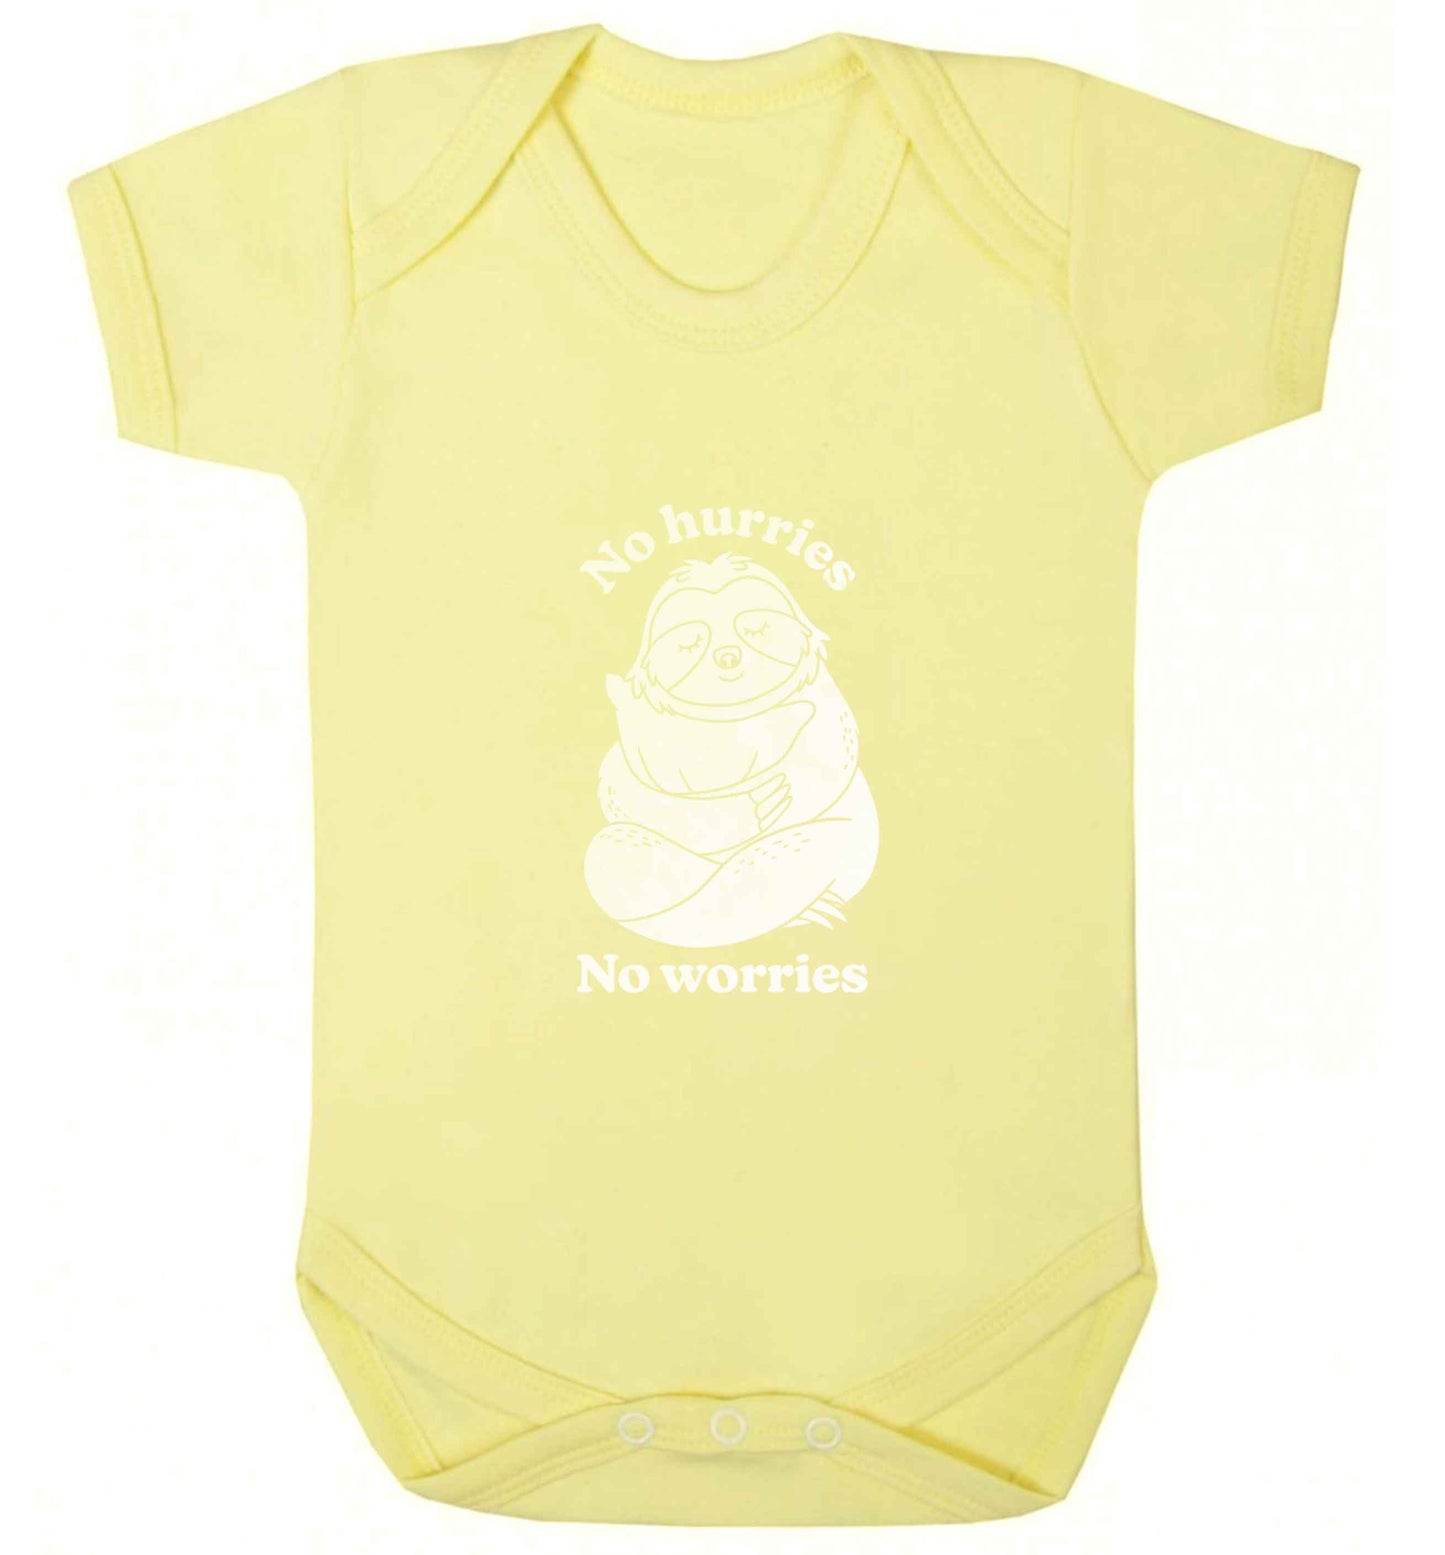 No hurries no worries baby vest pale yellow 18-24 months